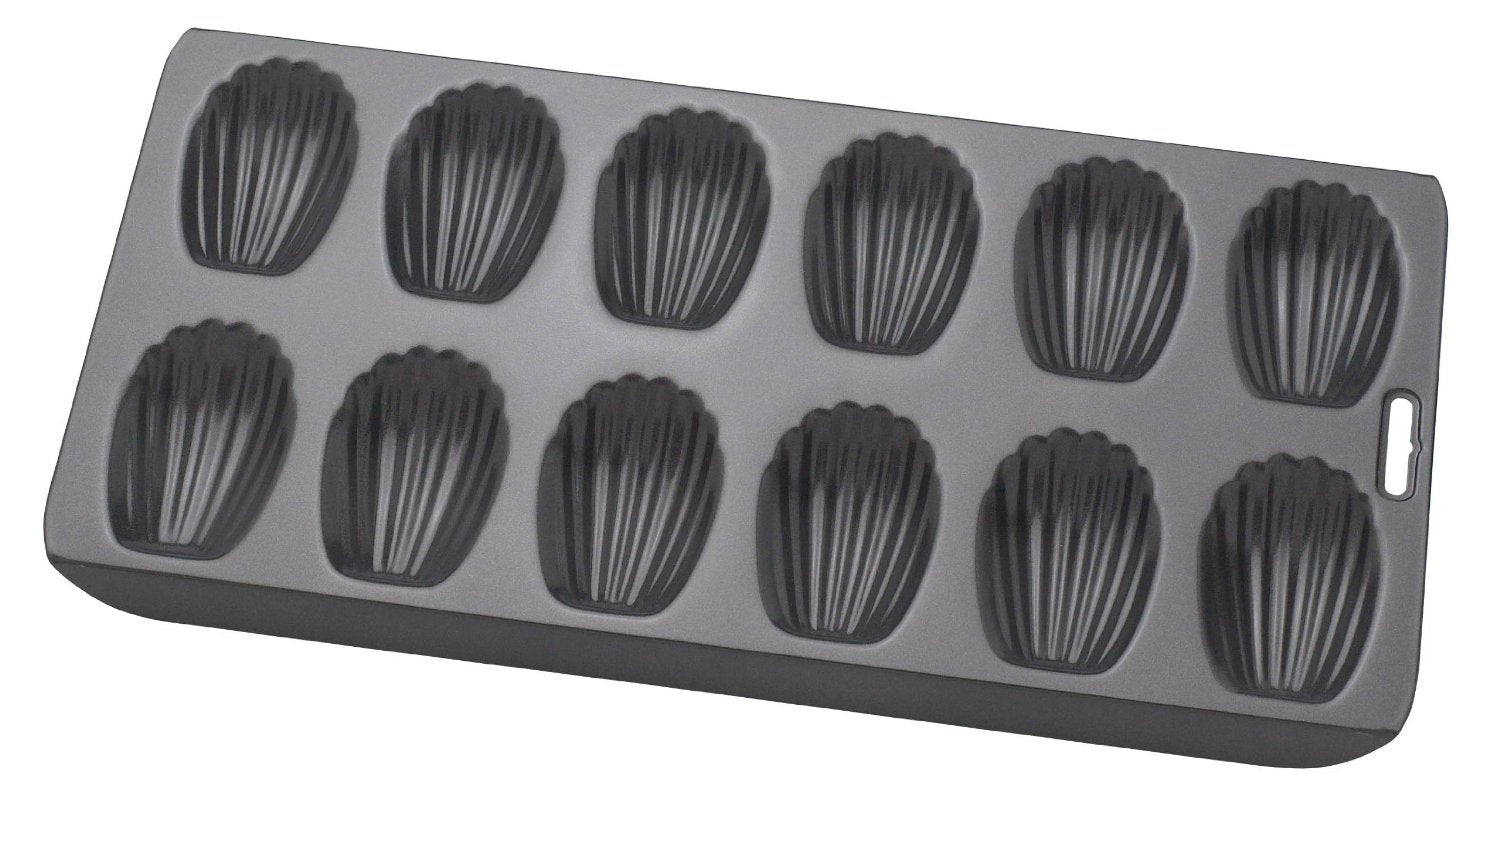 Harold Mrs. Anderson's Silicone Muffin Pan 6 cup